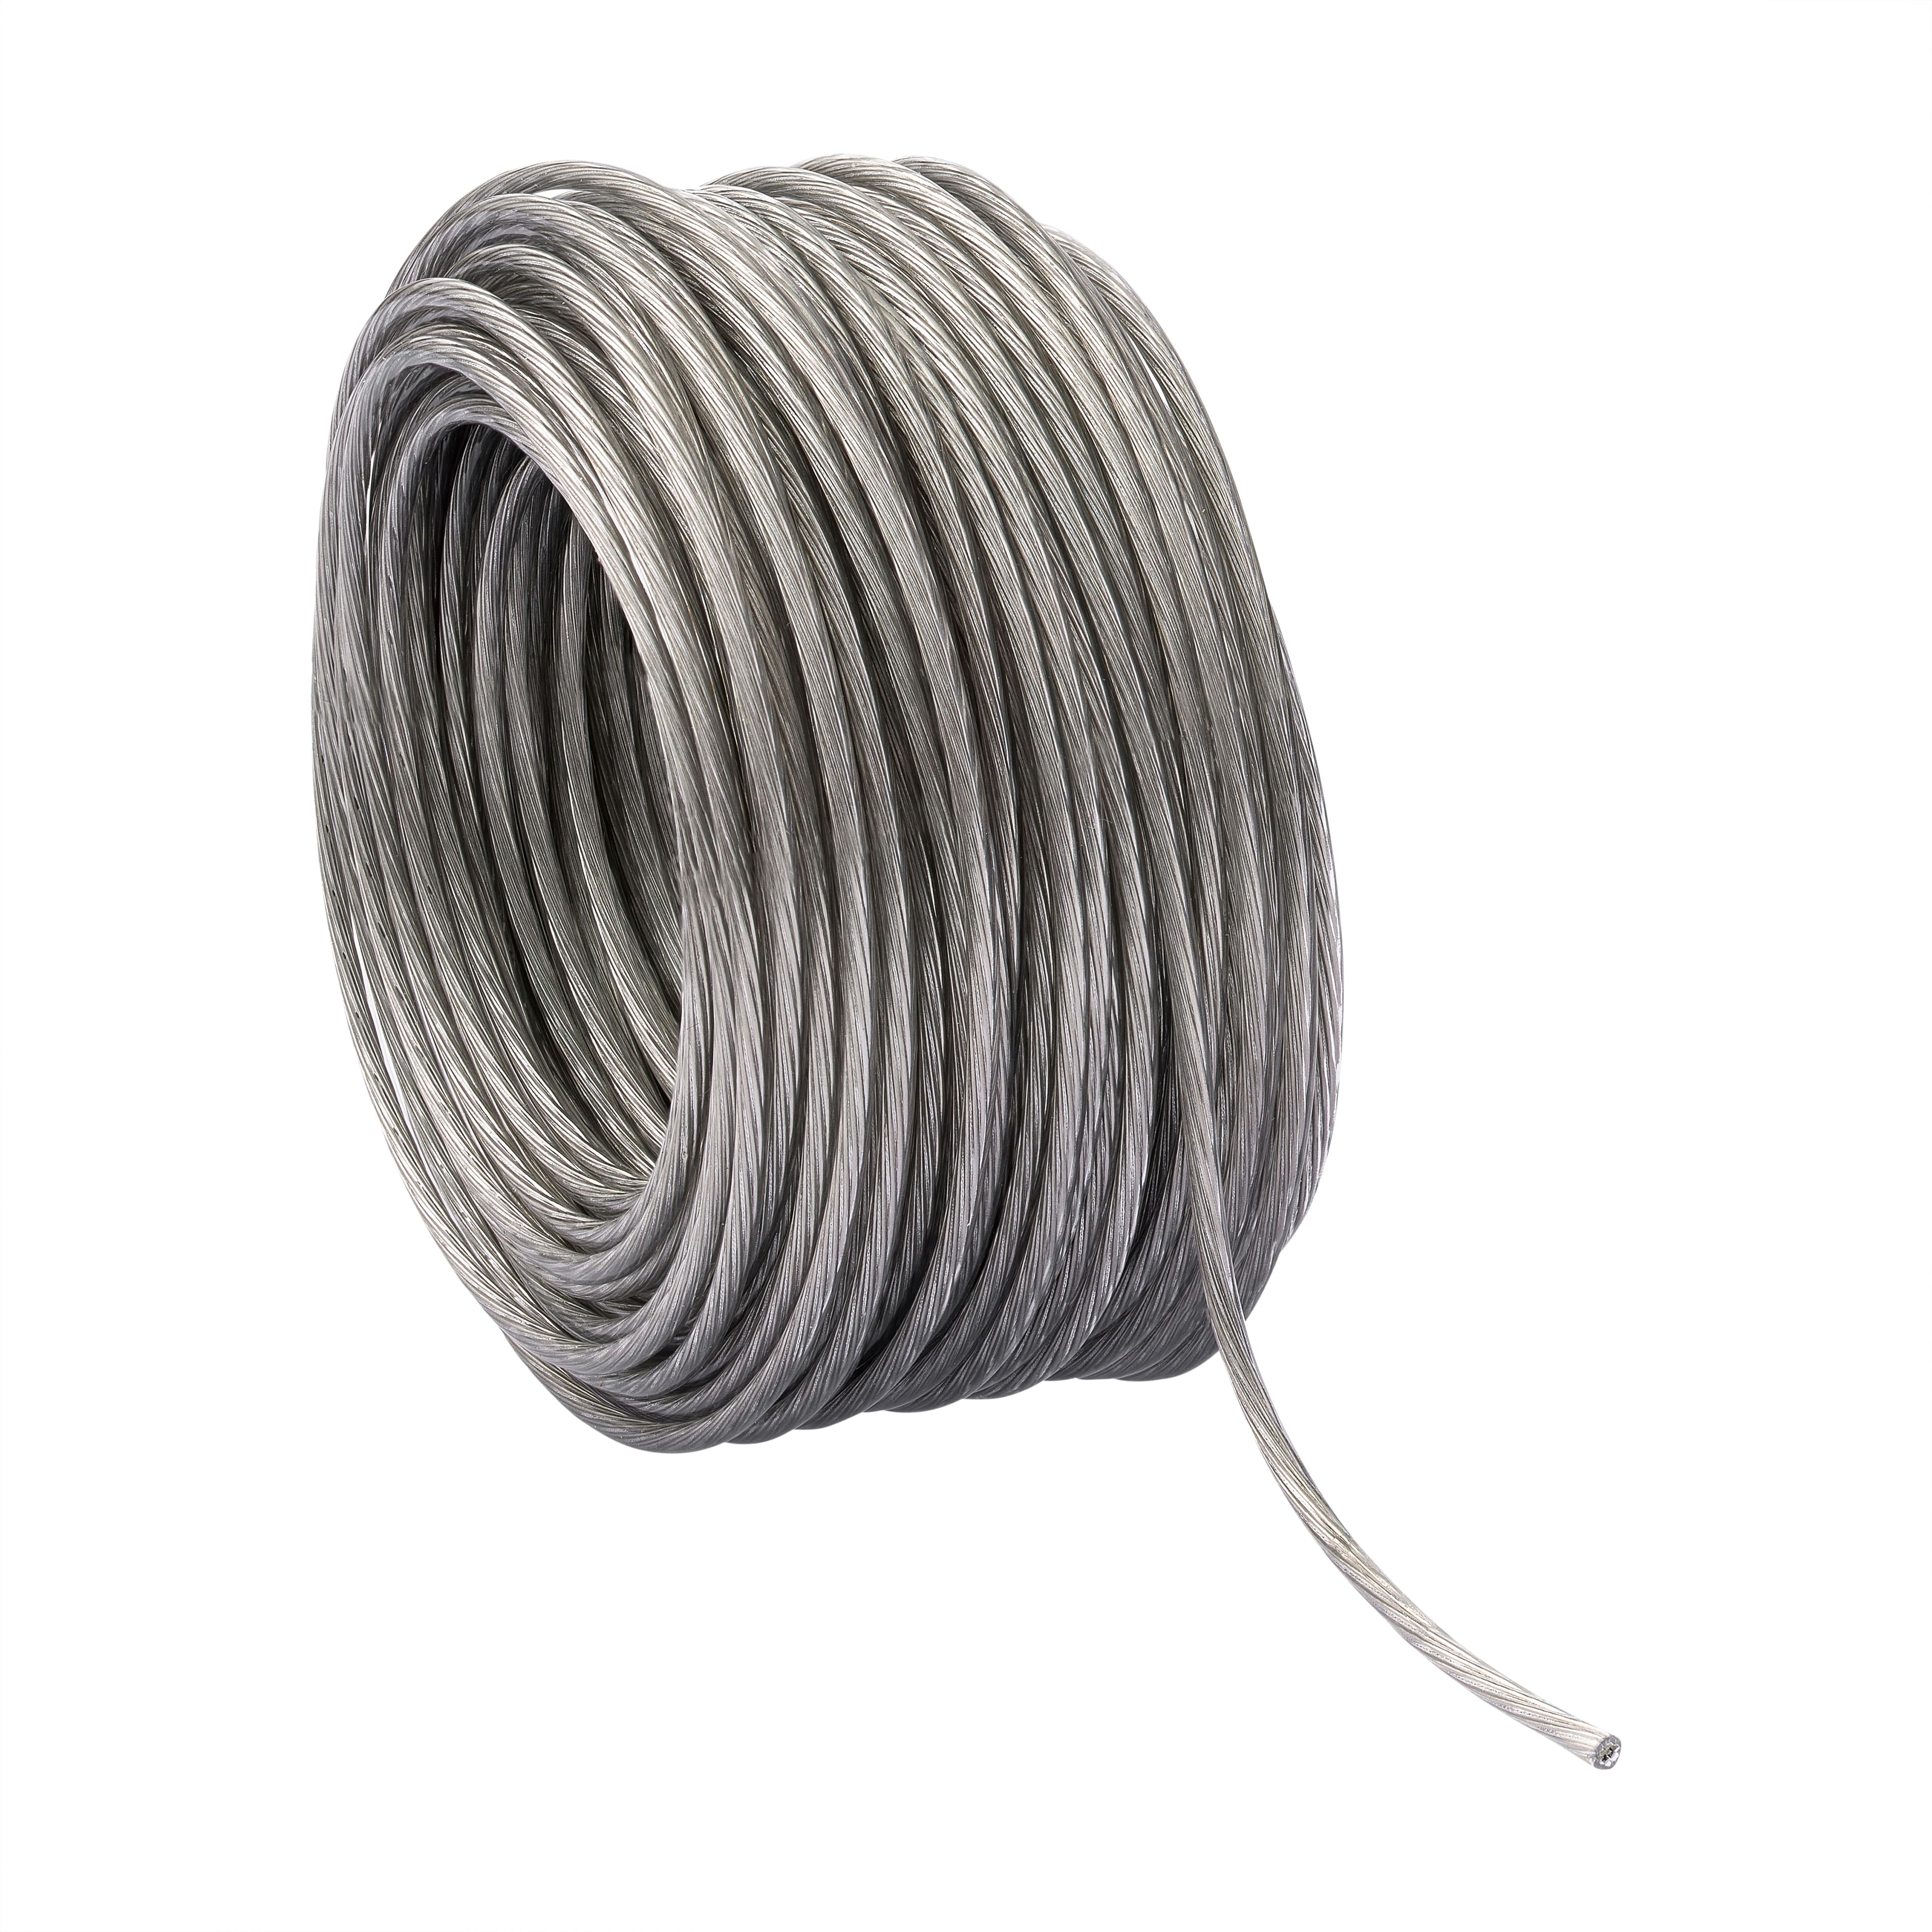 OOK 100lb Durasteel Stainless Hanging Wire 9ft